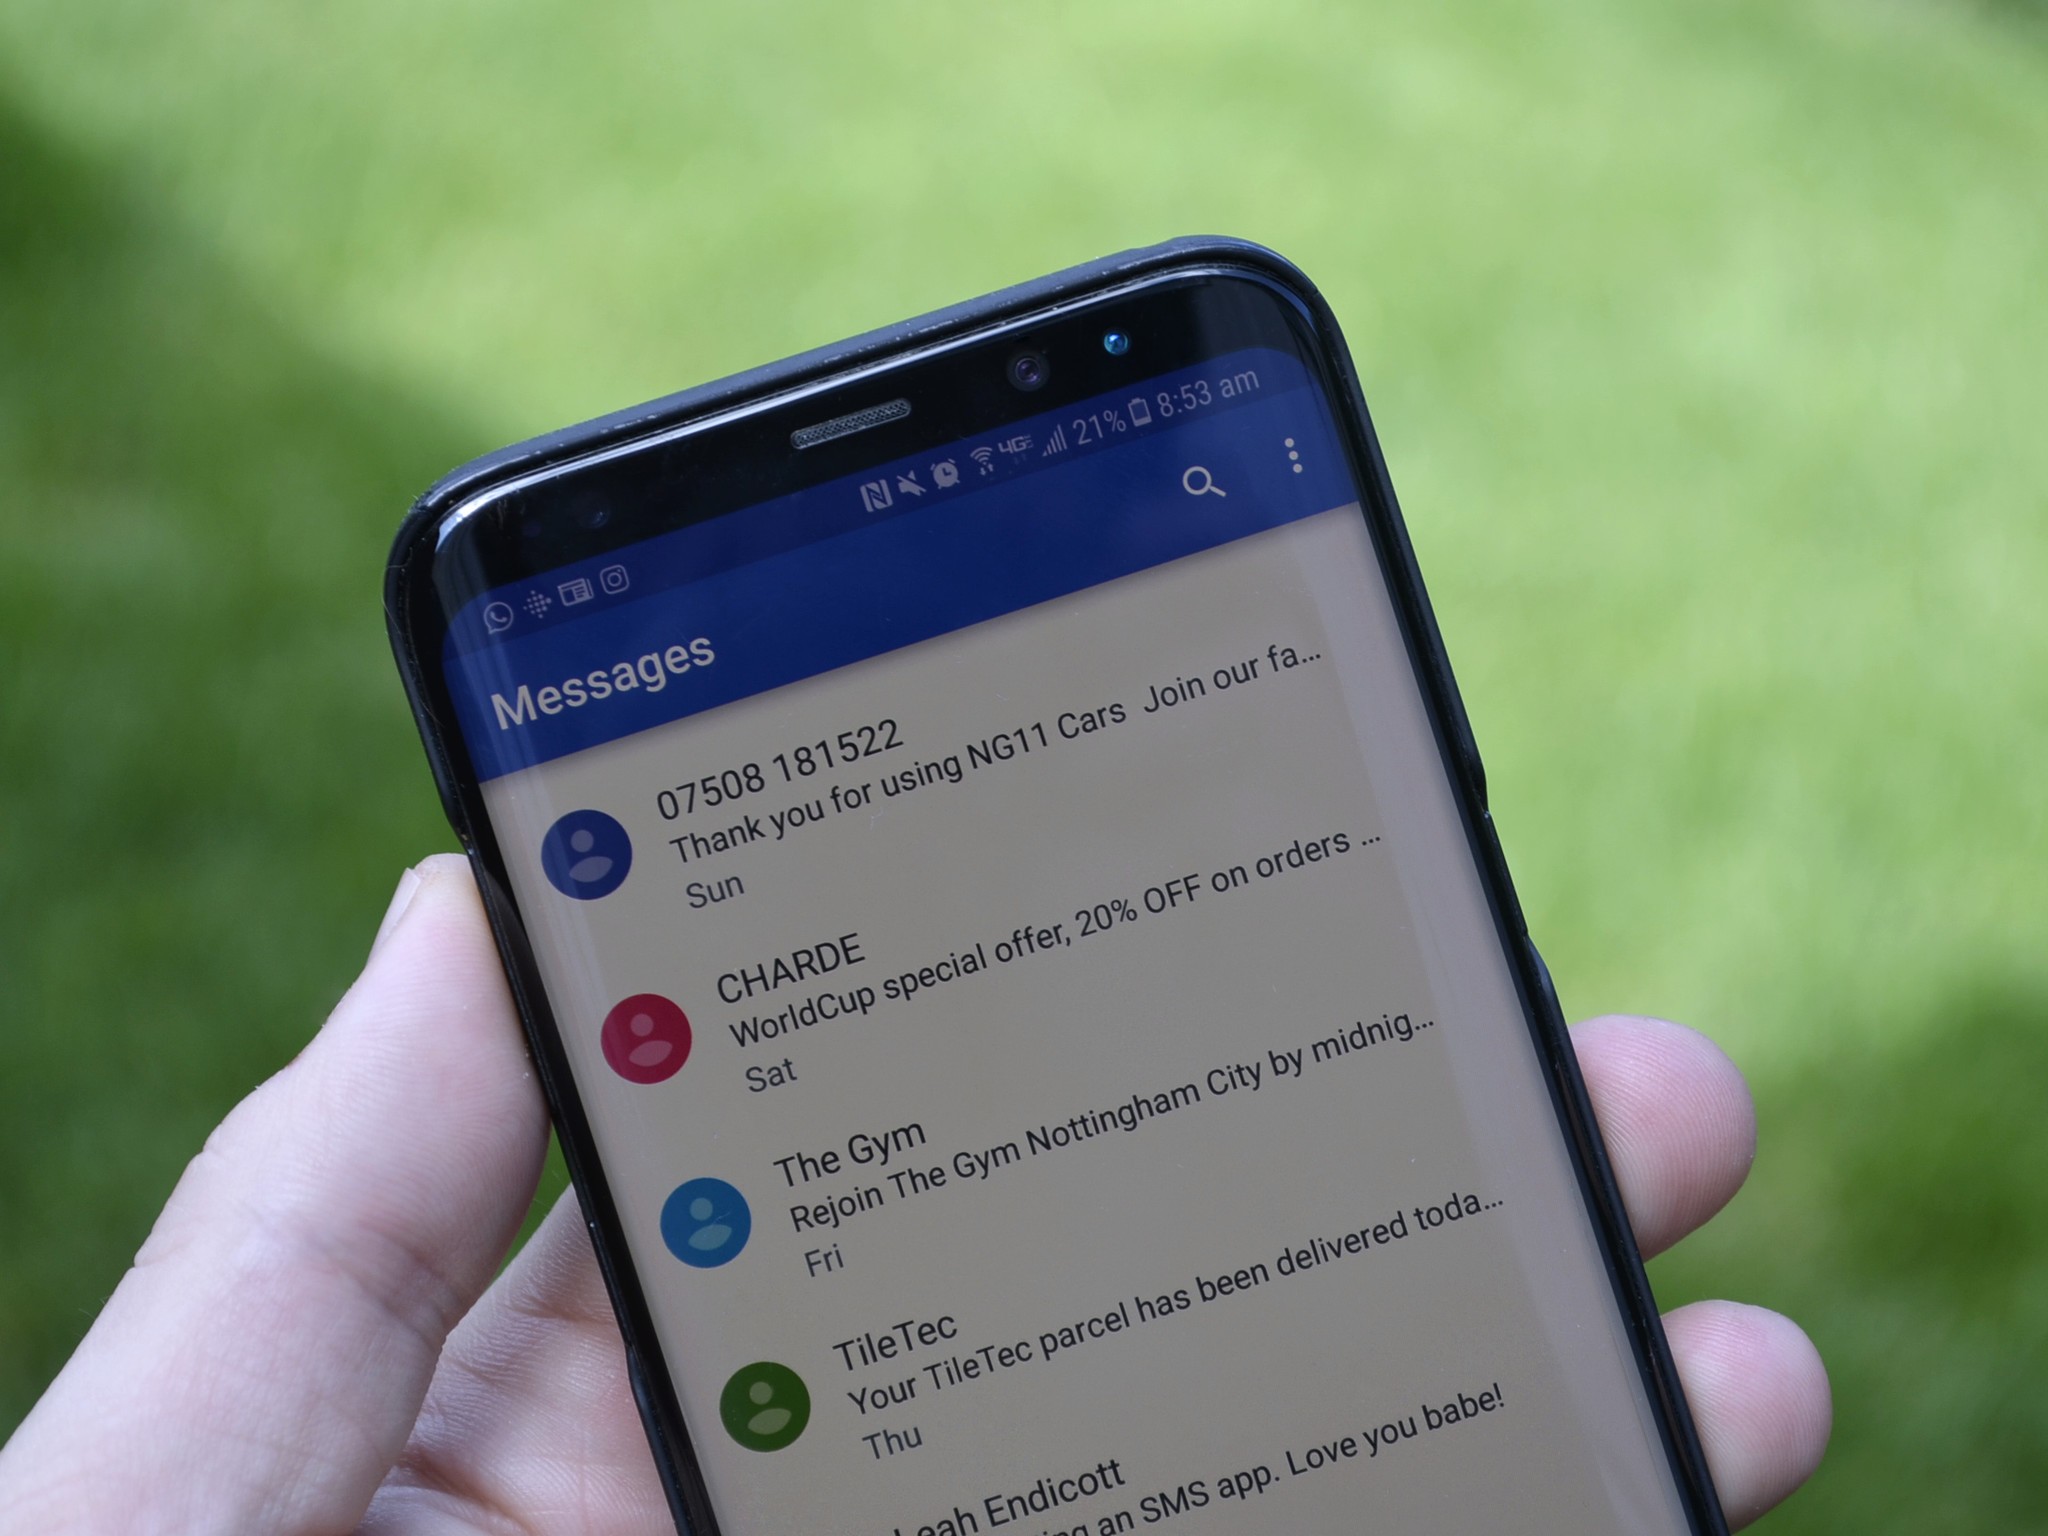 android messages lead 6i9p